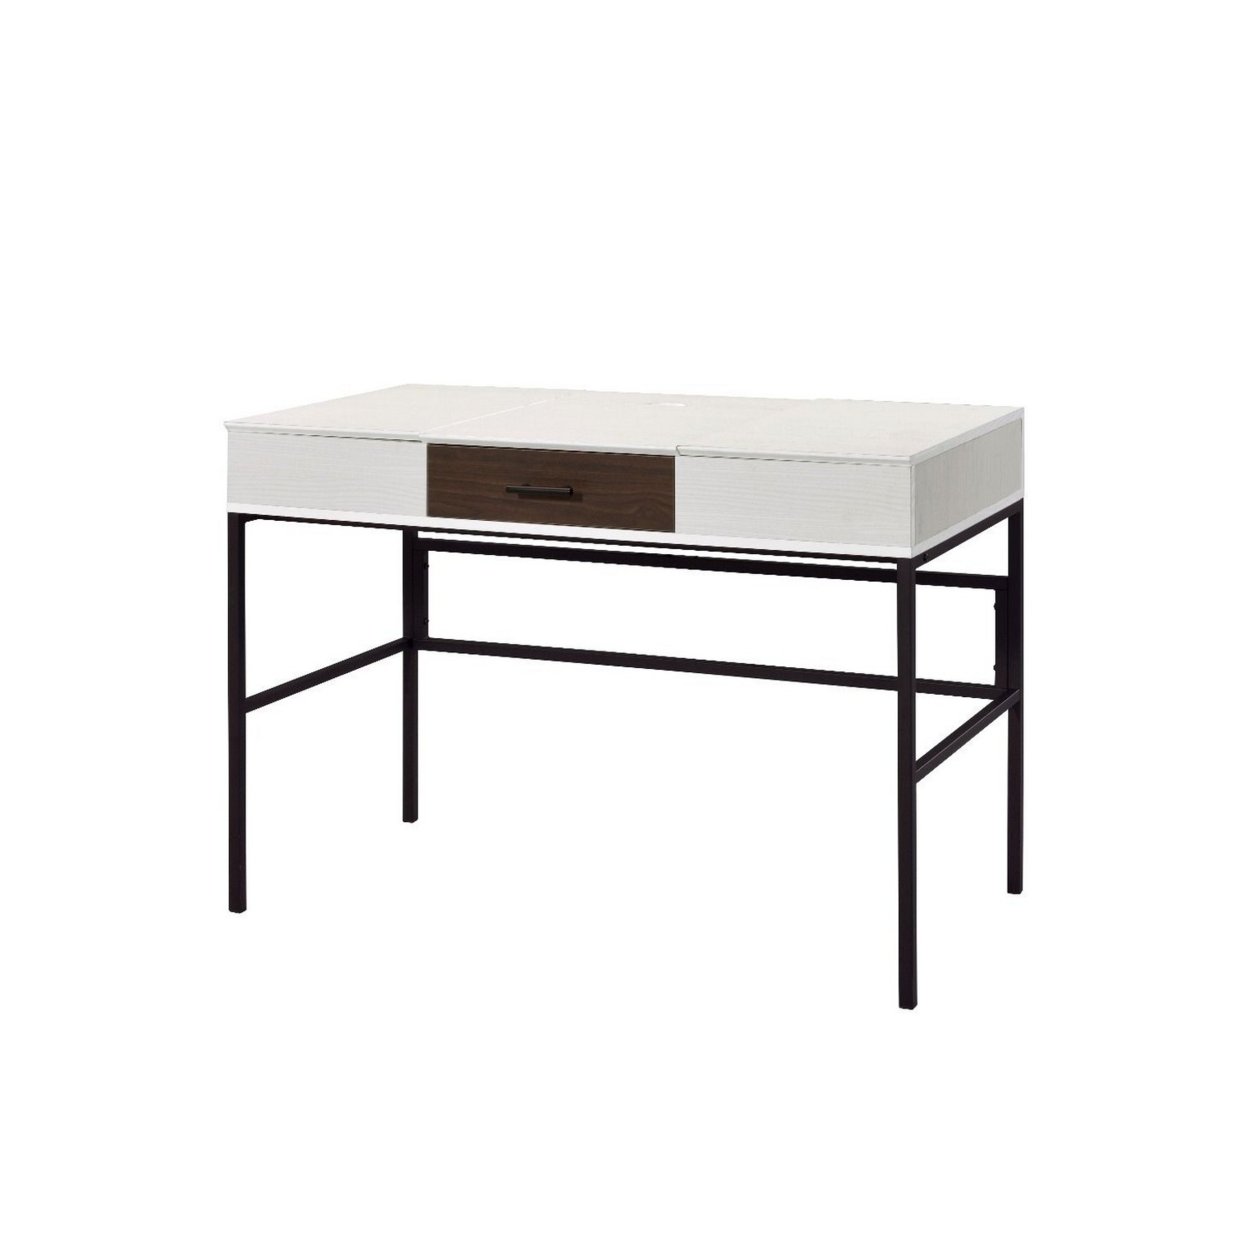 Writing Desk With 2 Hinged Top Storage Compartments, White And Black- Saltoro Sherpi